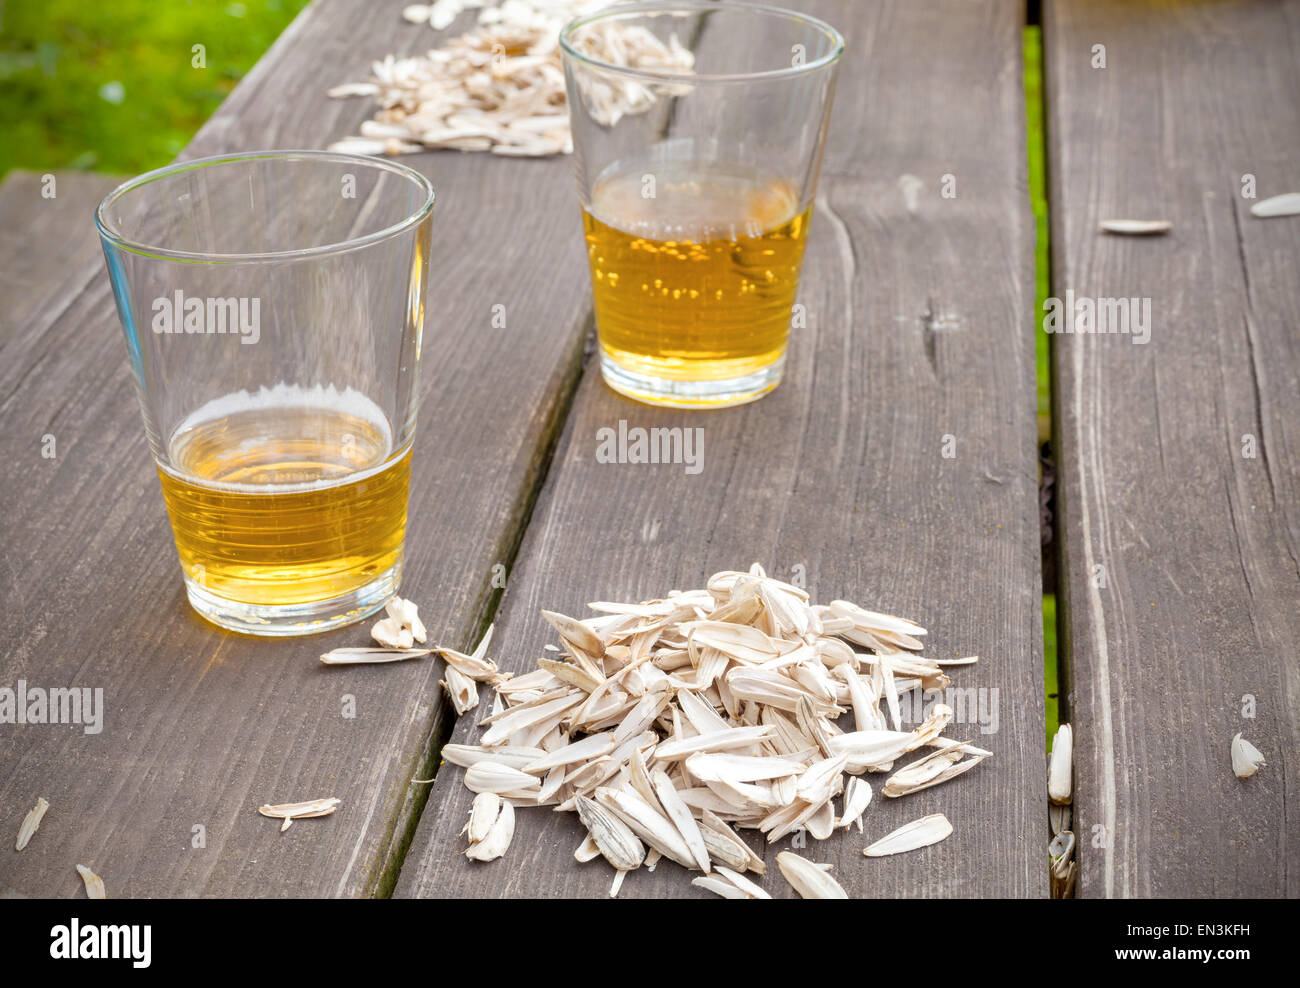 Sunflower seed husks and two glasses on the garden table, summer snack concept. Stock Photo